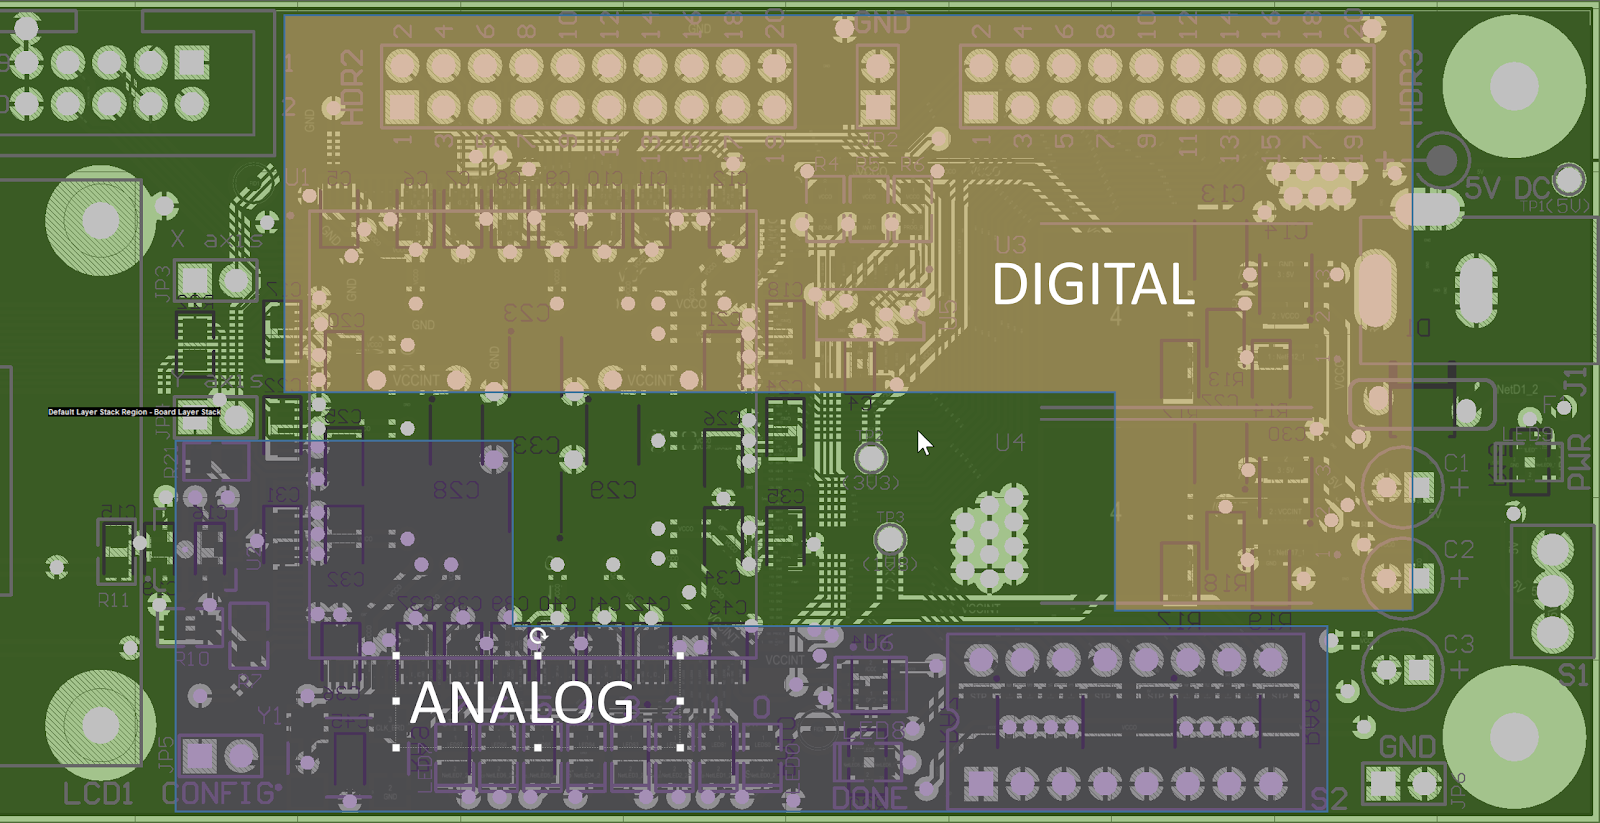 Analog and digital ground regions in a PCB